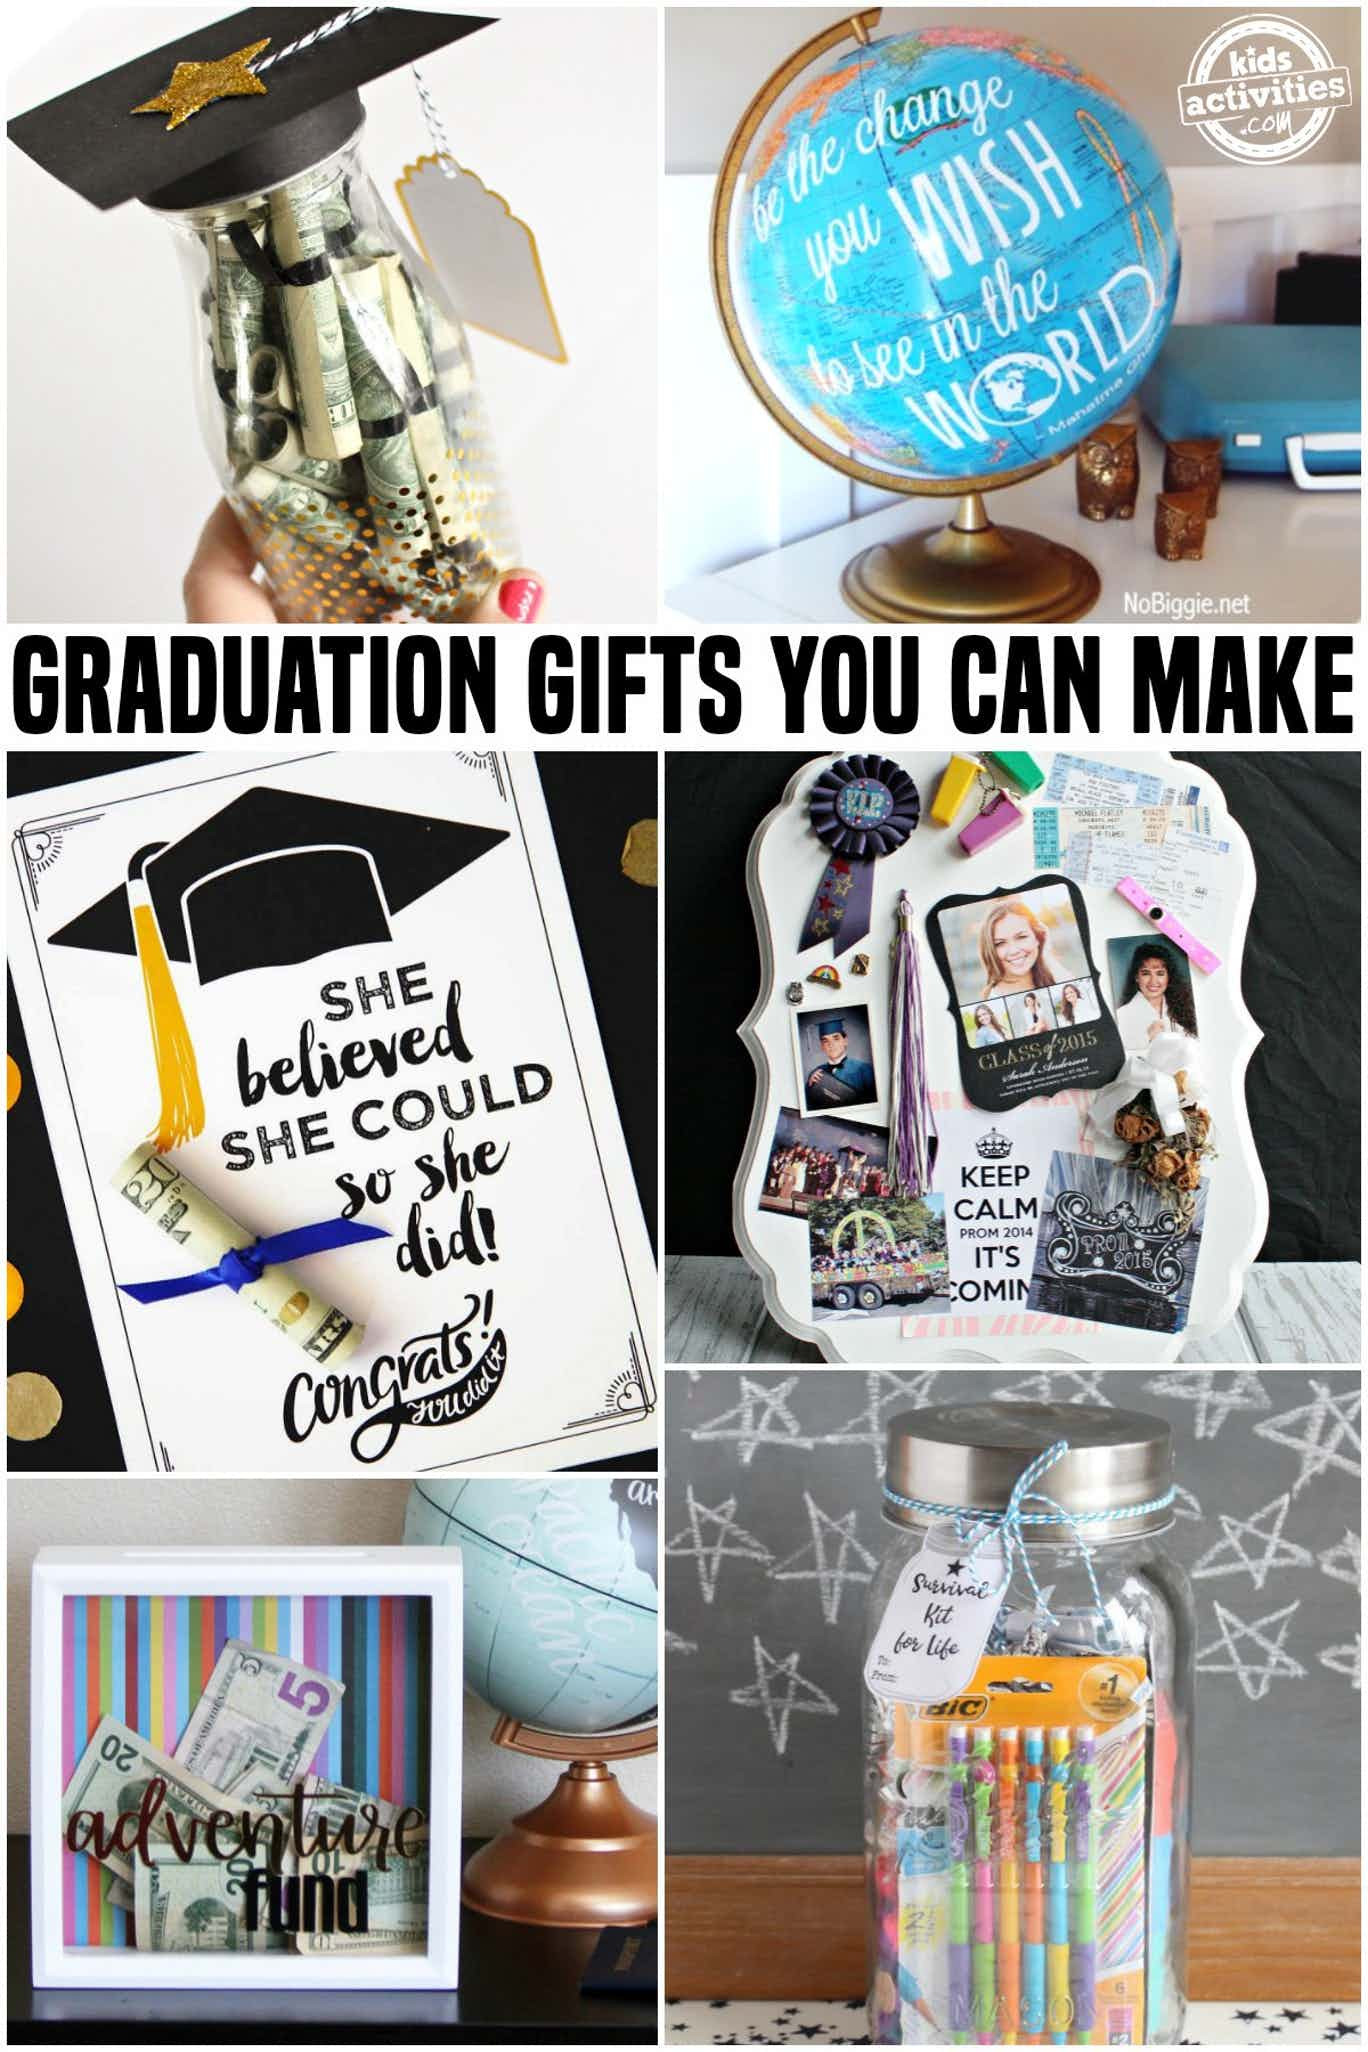 Funny Graduation Gift Ideas
 Awesome Graduation Gifts You Can Make At Home